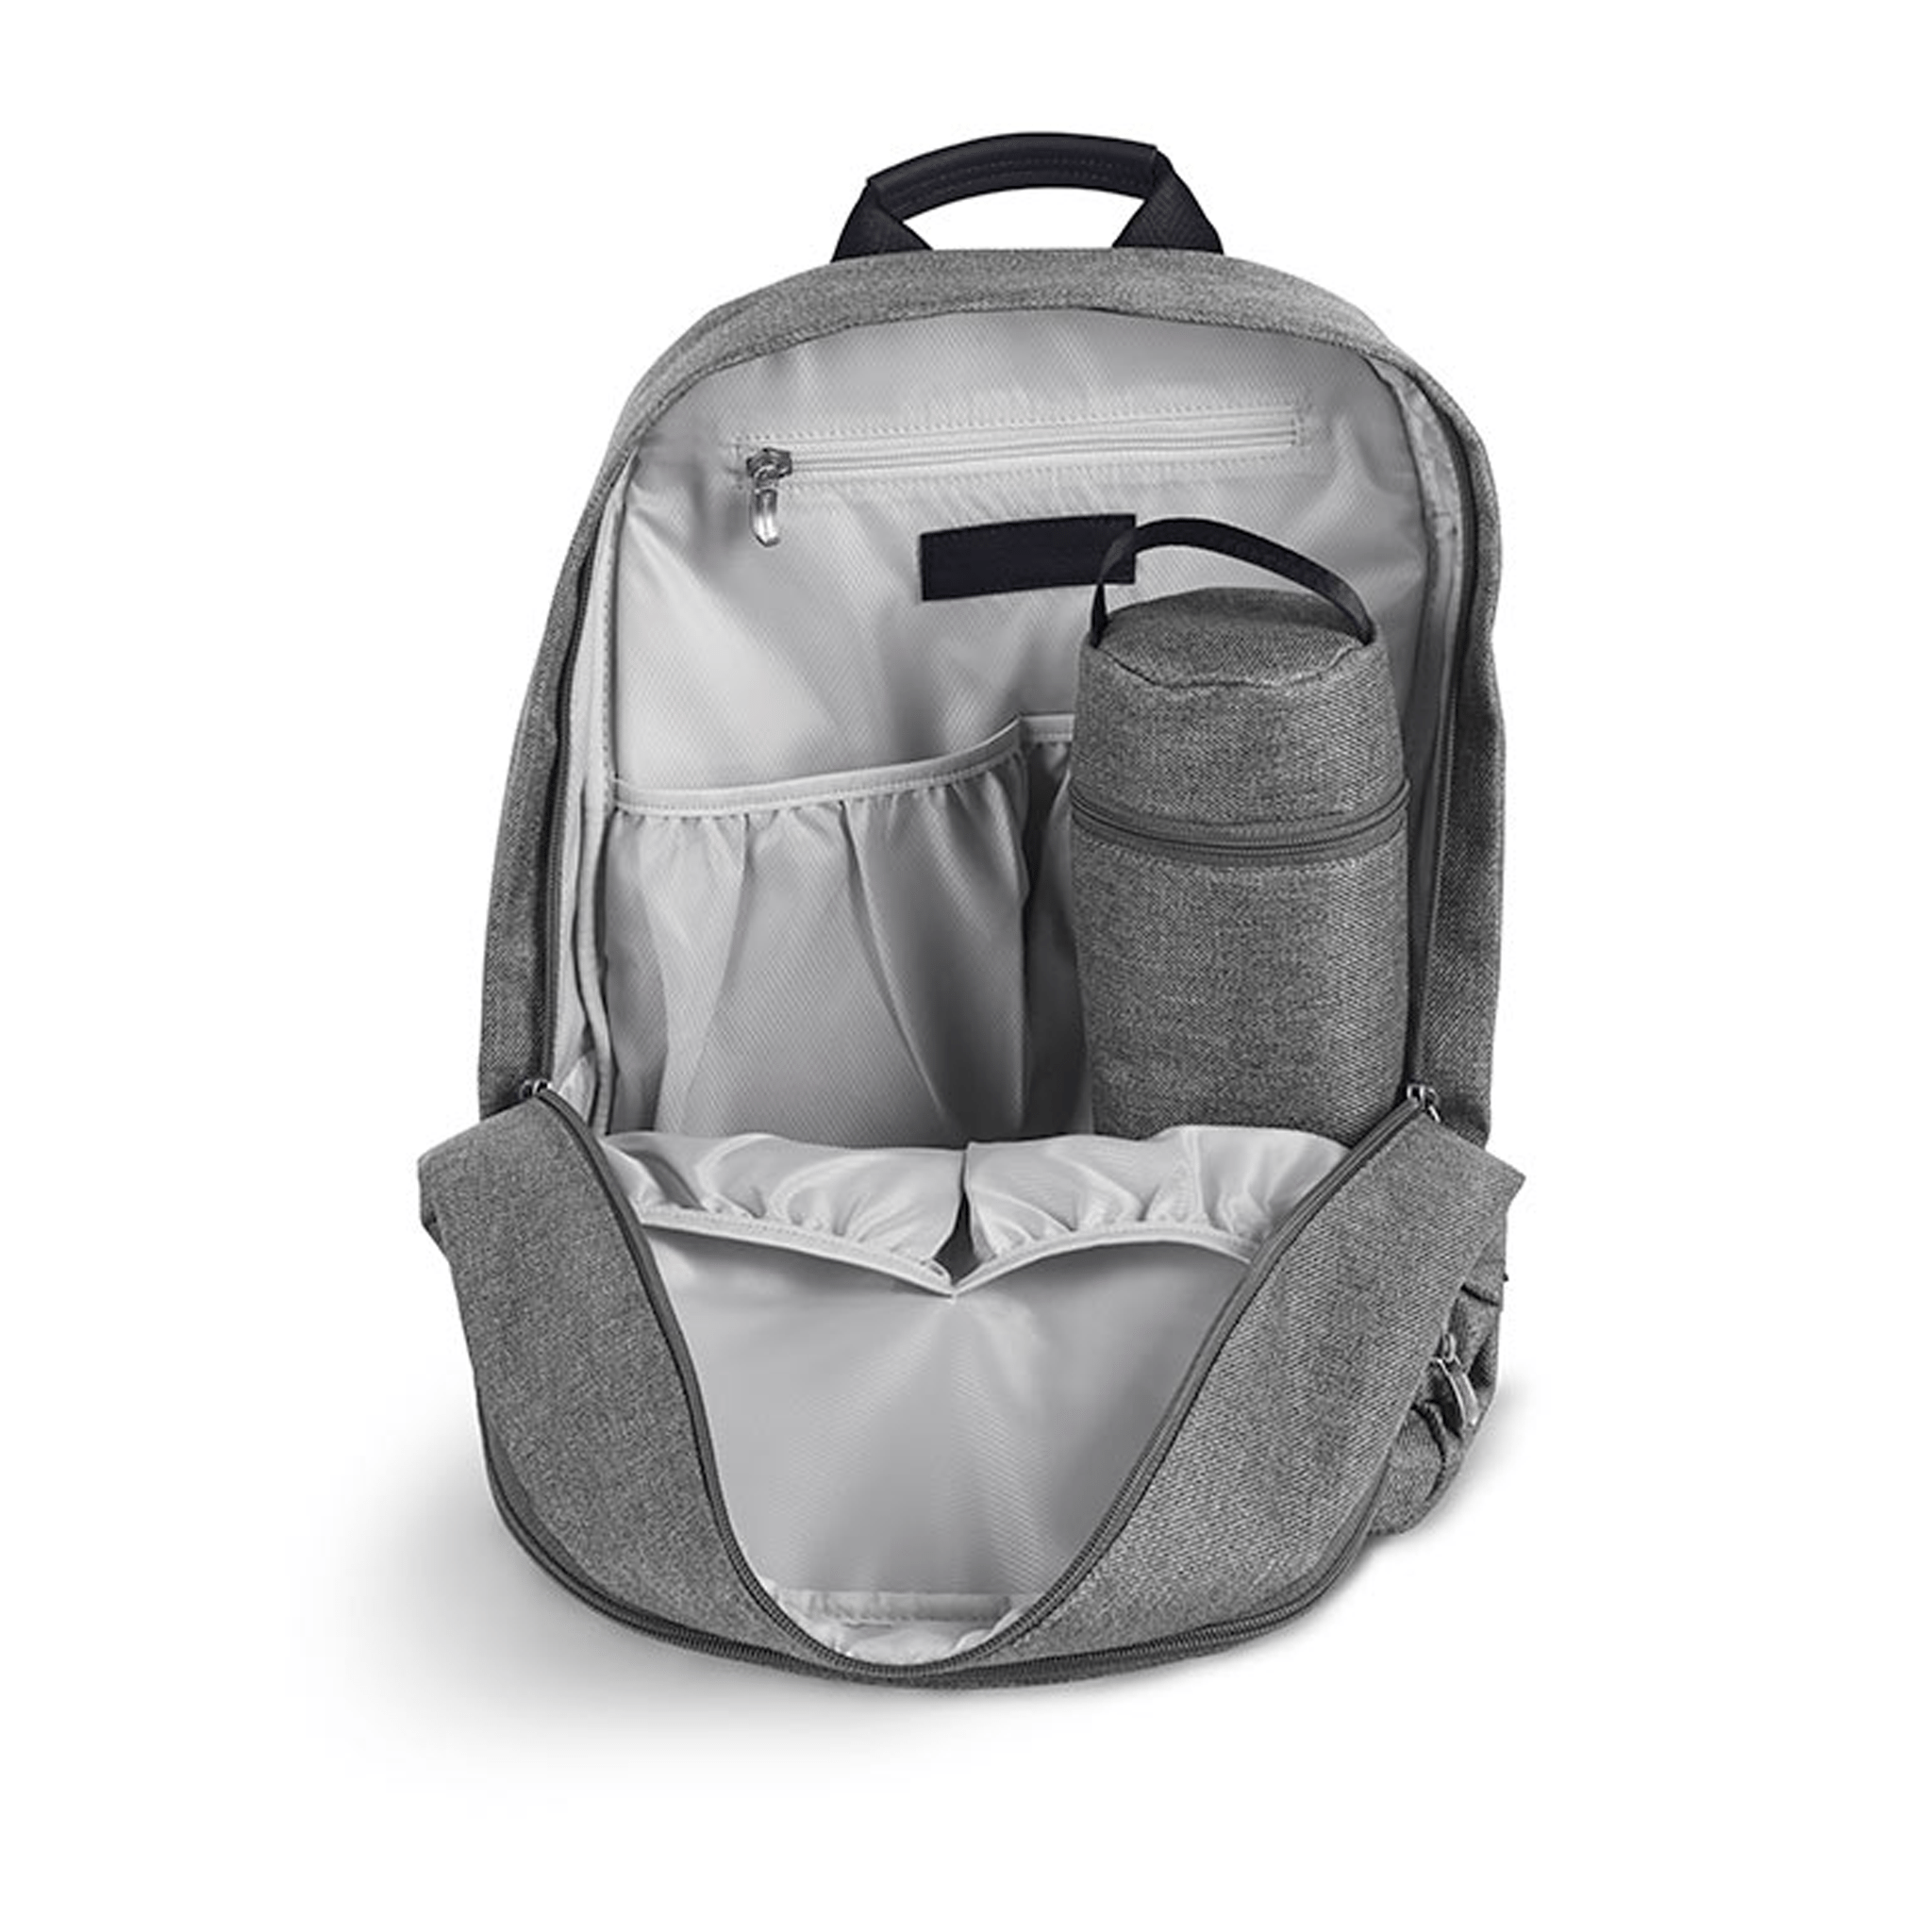 Uppababy Changing Backpack Emmett Changing Bags 0919-dpb-ww-emt 850001436489